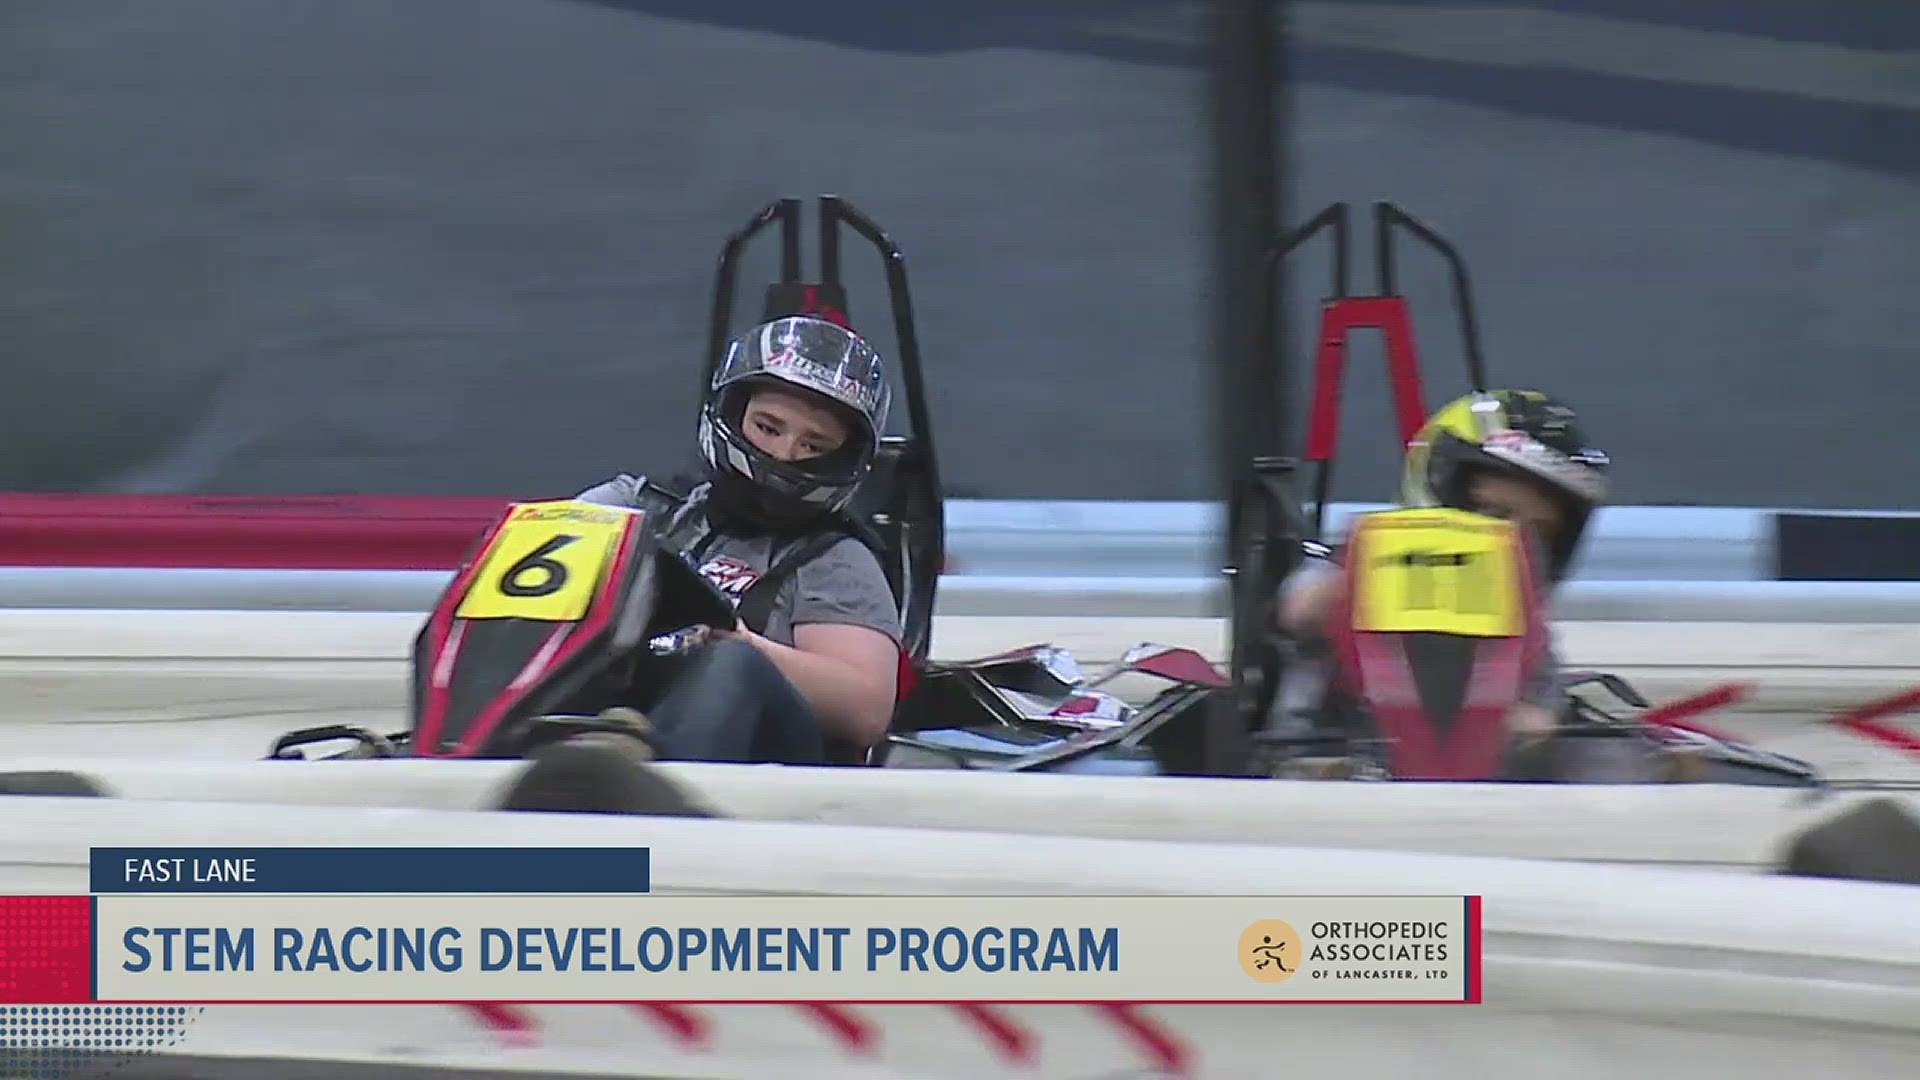 Driver Owen Dimm is leading the first Racing Development Program at Autobahn Indoor Speedway.